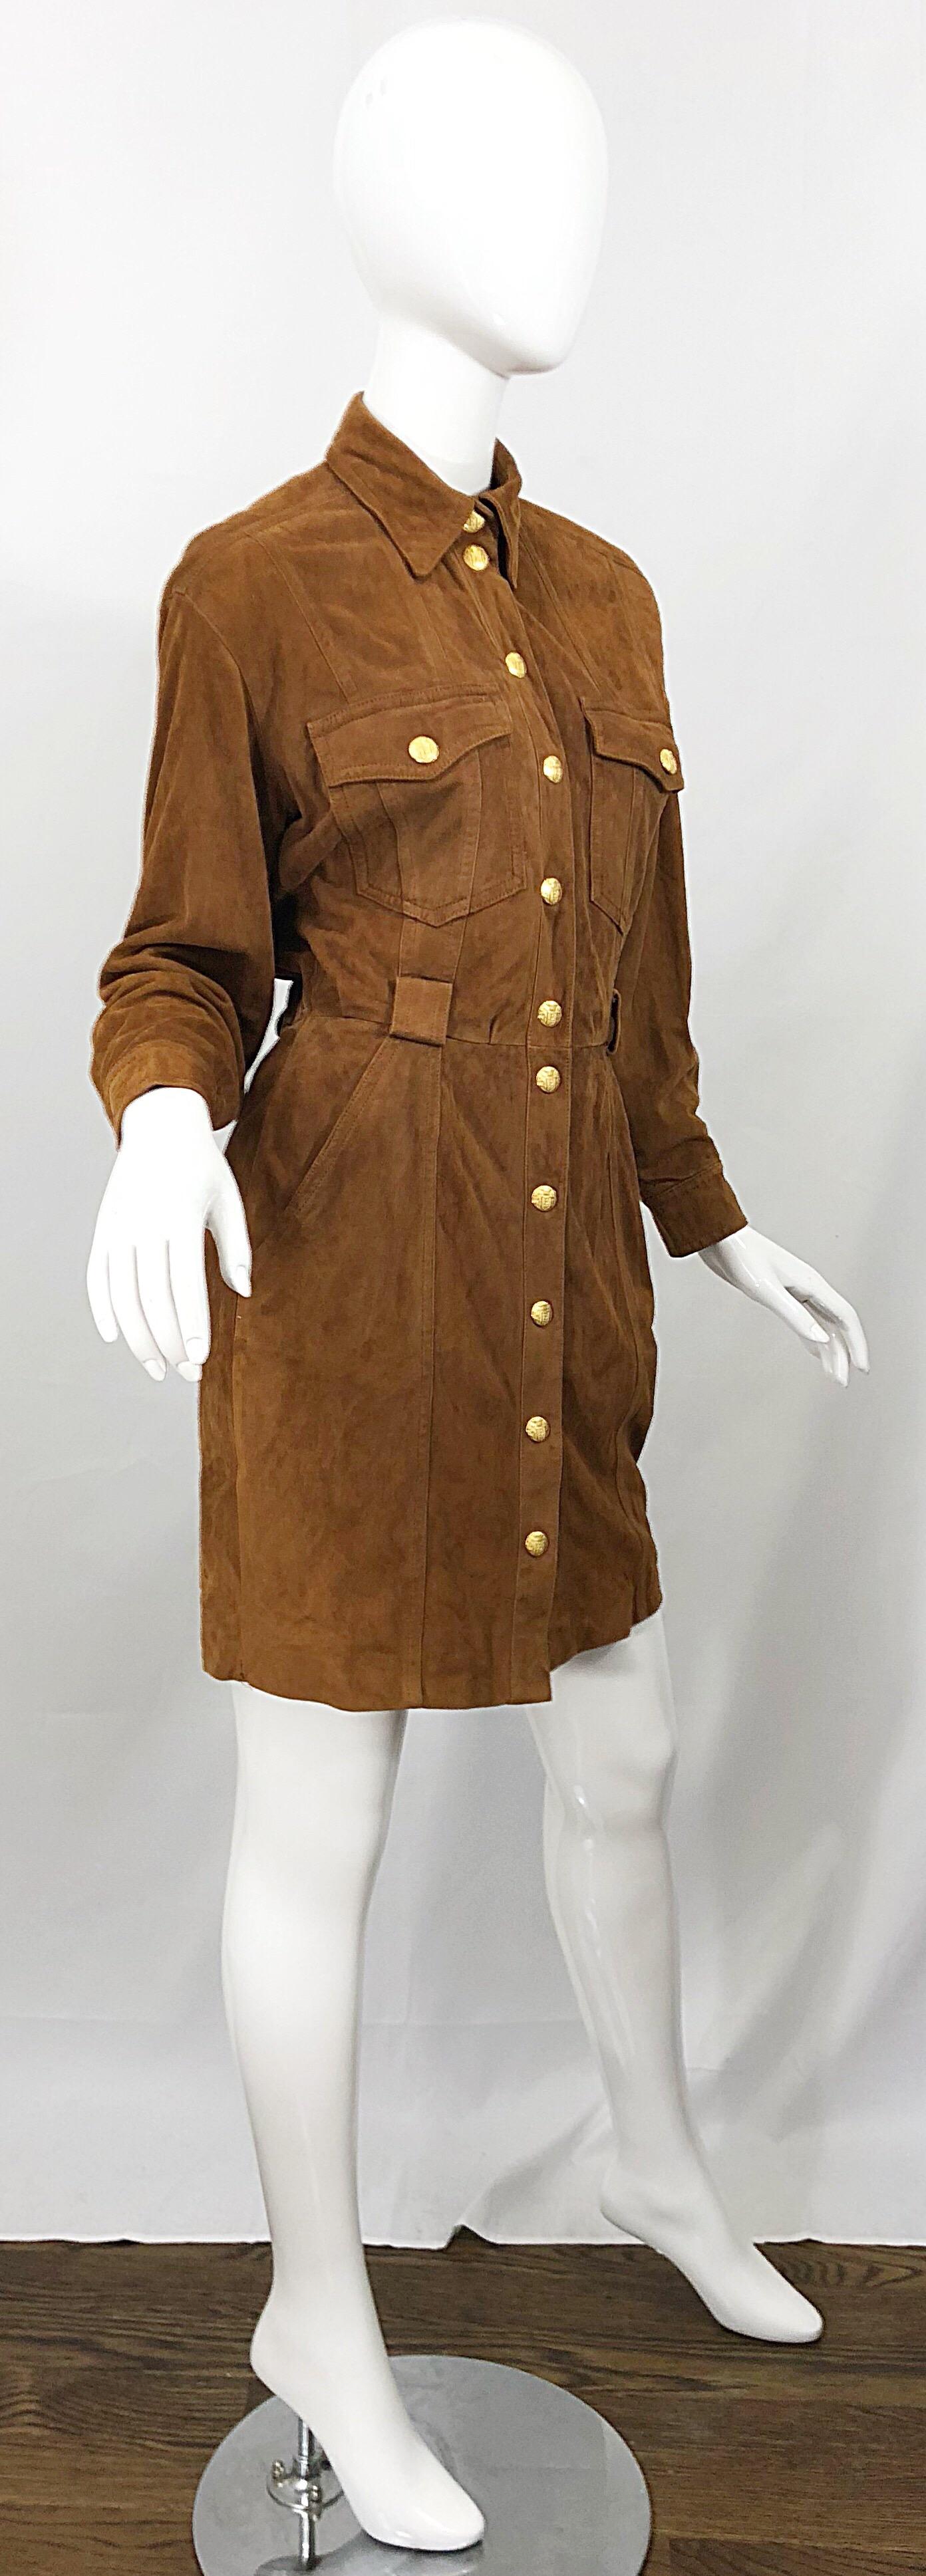 Vintage Escada by Margaretha Ley 1990s Saddle Brown Suede Leather Jacket Dress For Sale 6